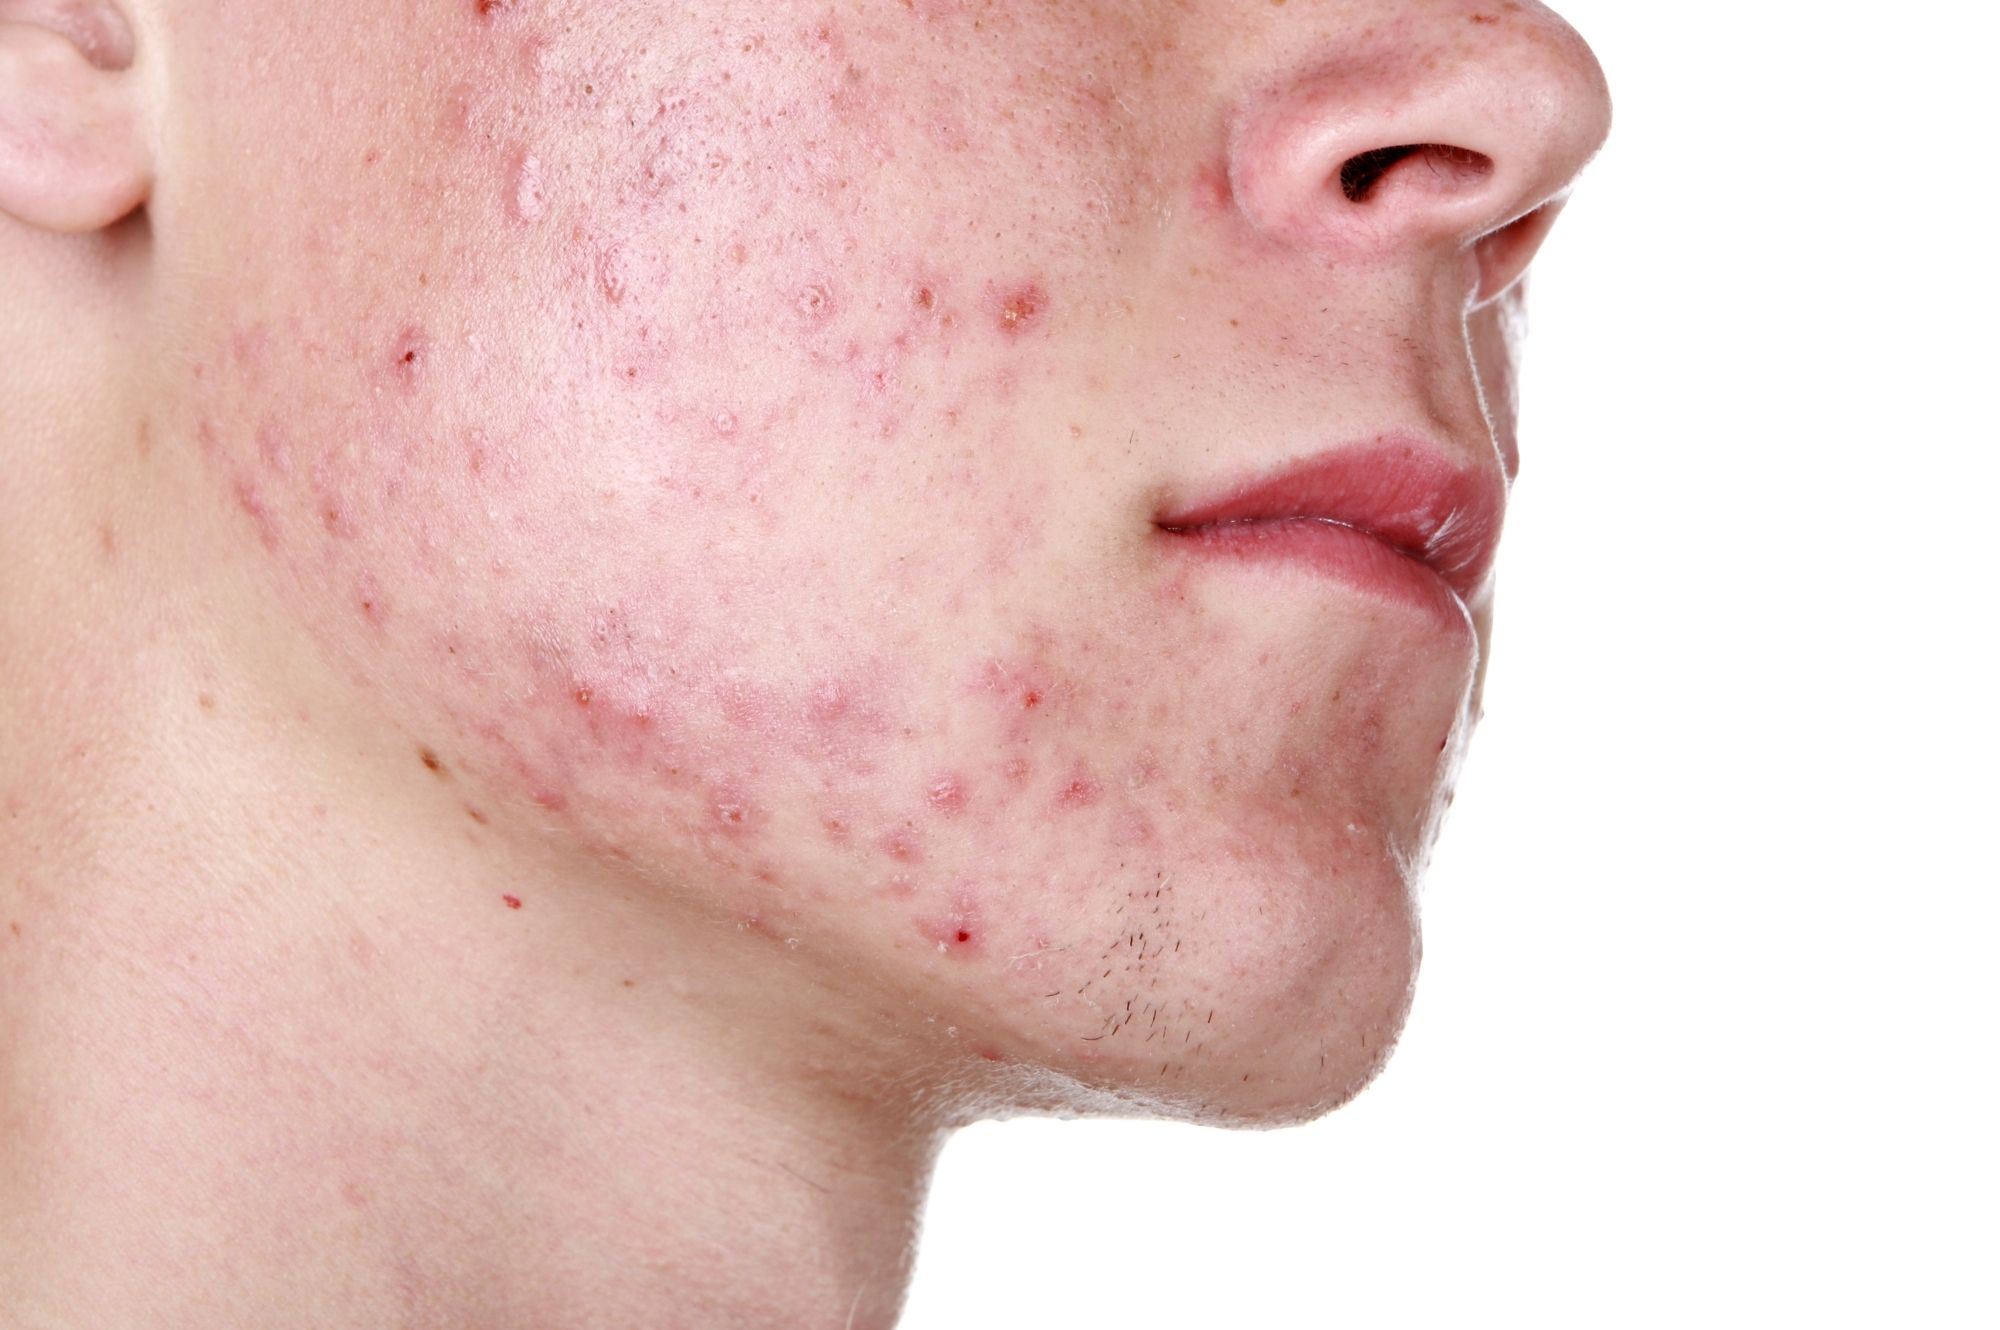 Home remedies to prevent acne